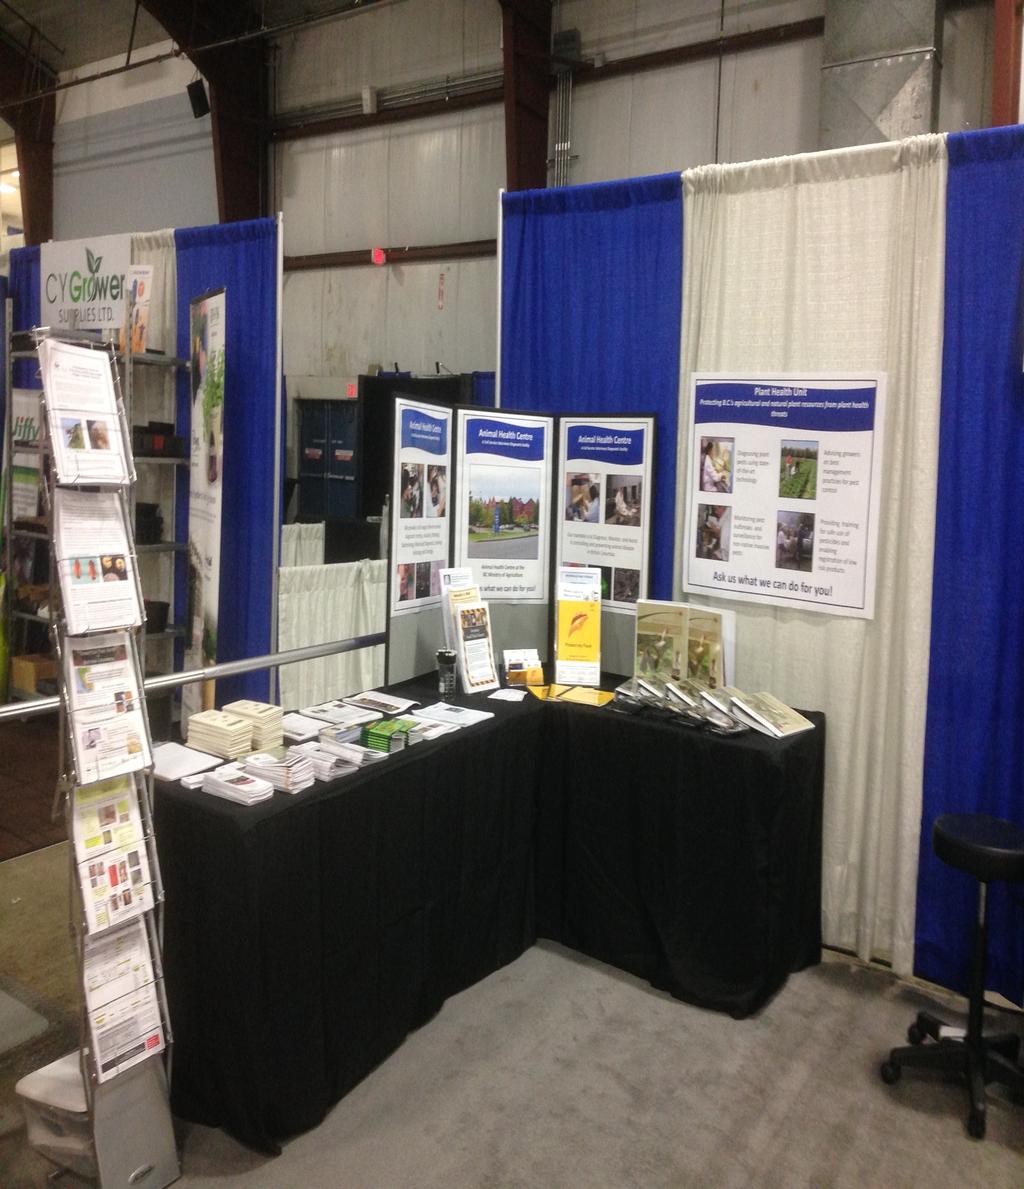 Page 6 February 2015 17th Annual Pacific Agriculture Show January 29-31, 2015 Abbotsford Tradex The 3-day event was attended by over 7,500 visitors and there was a record turnout of 300 exhibitor